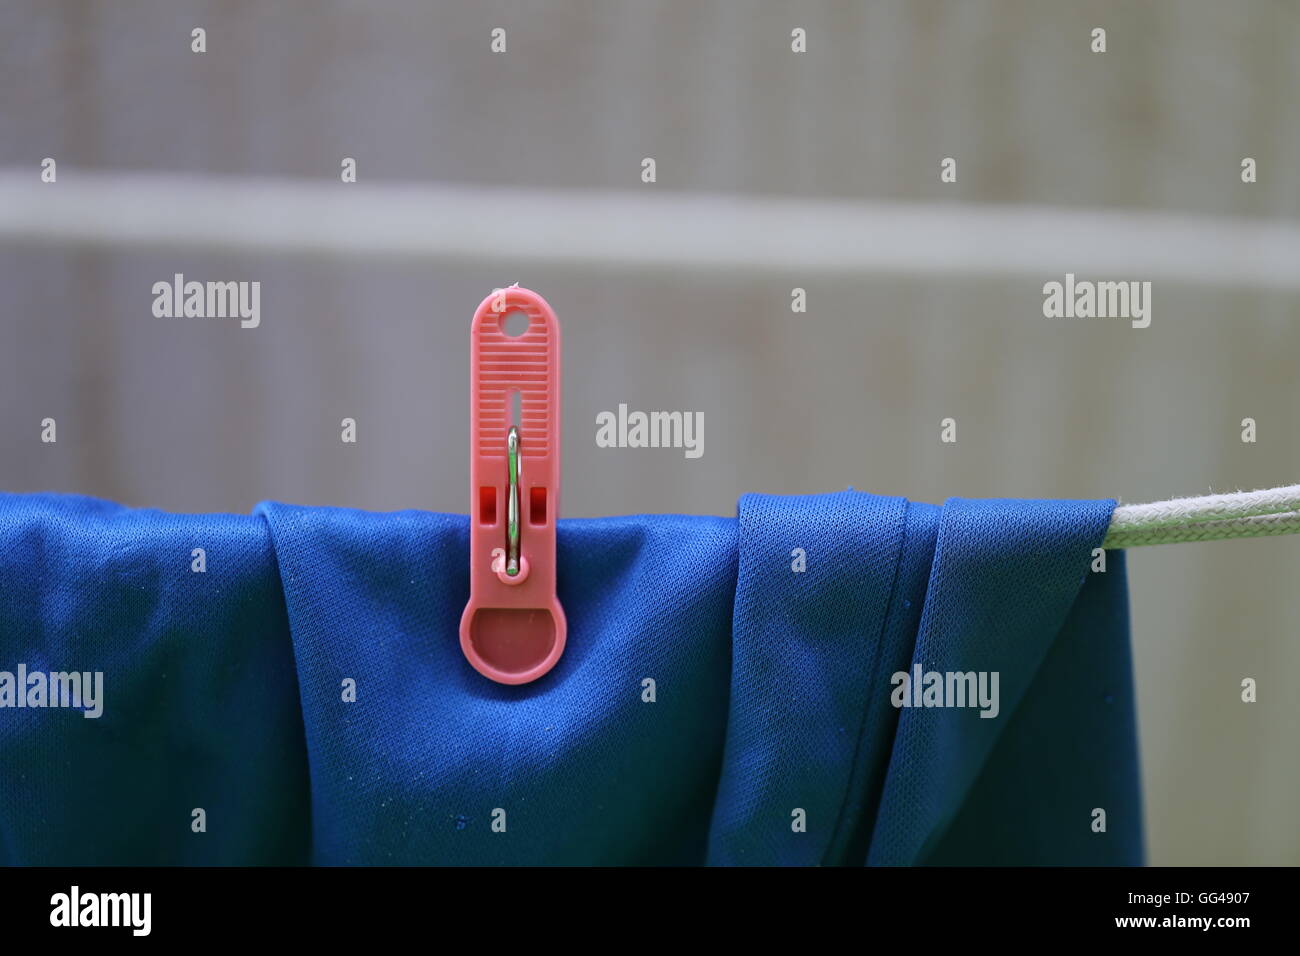 Blue Laundry Drying. Blue Shorts hanging on a clothes line with single red clothespin, plastic laundry stick. Sun drying  - green housekeeping. Stock Photo